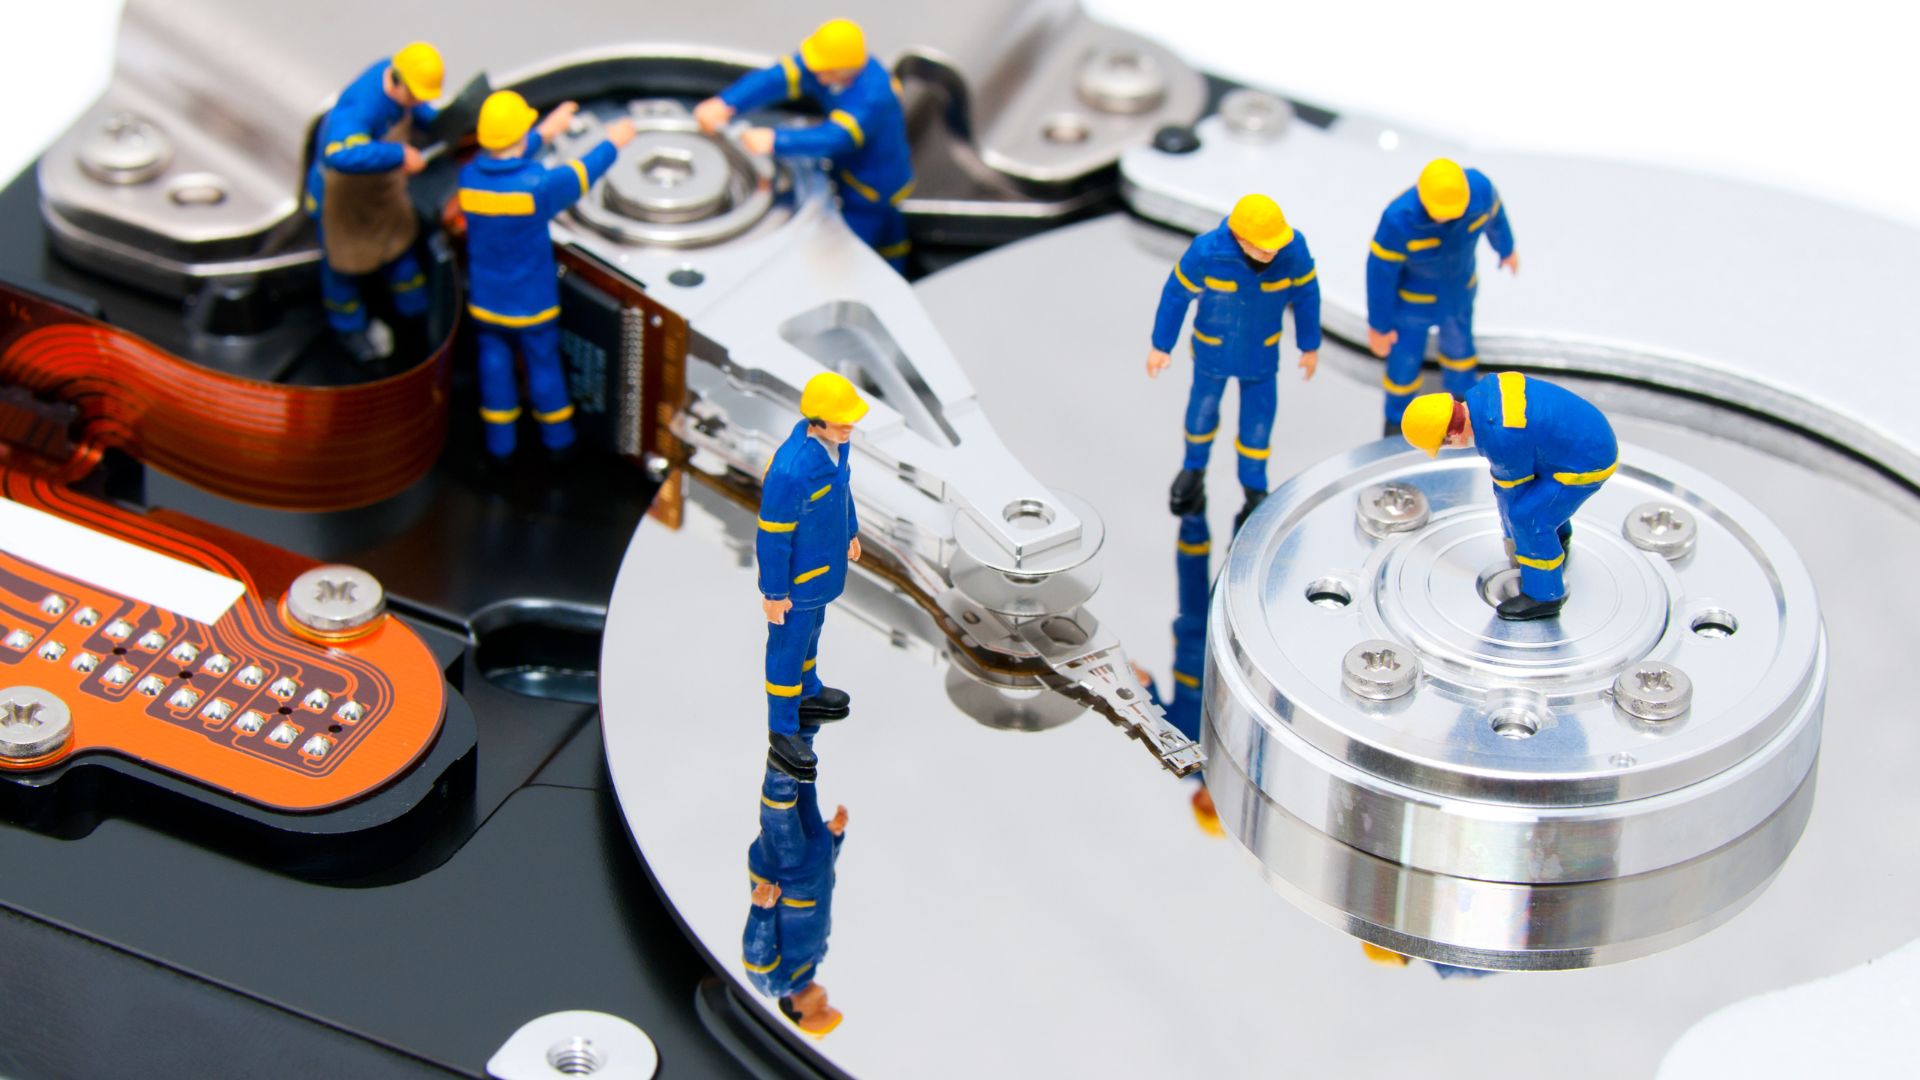 How To Test Your Hard Disk Drive For Problems